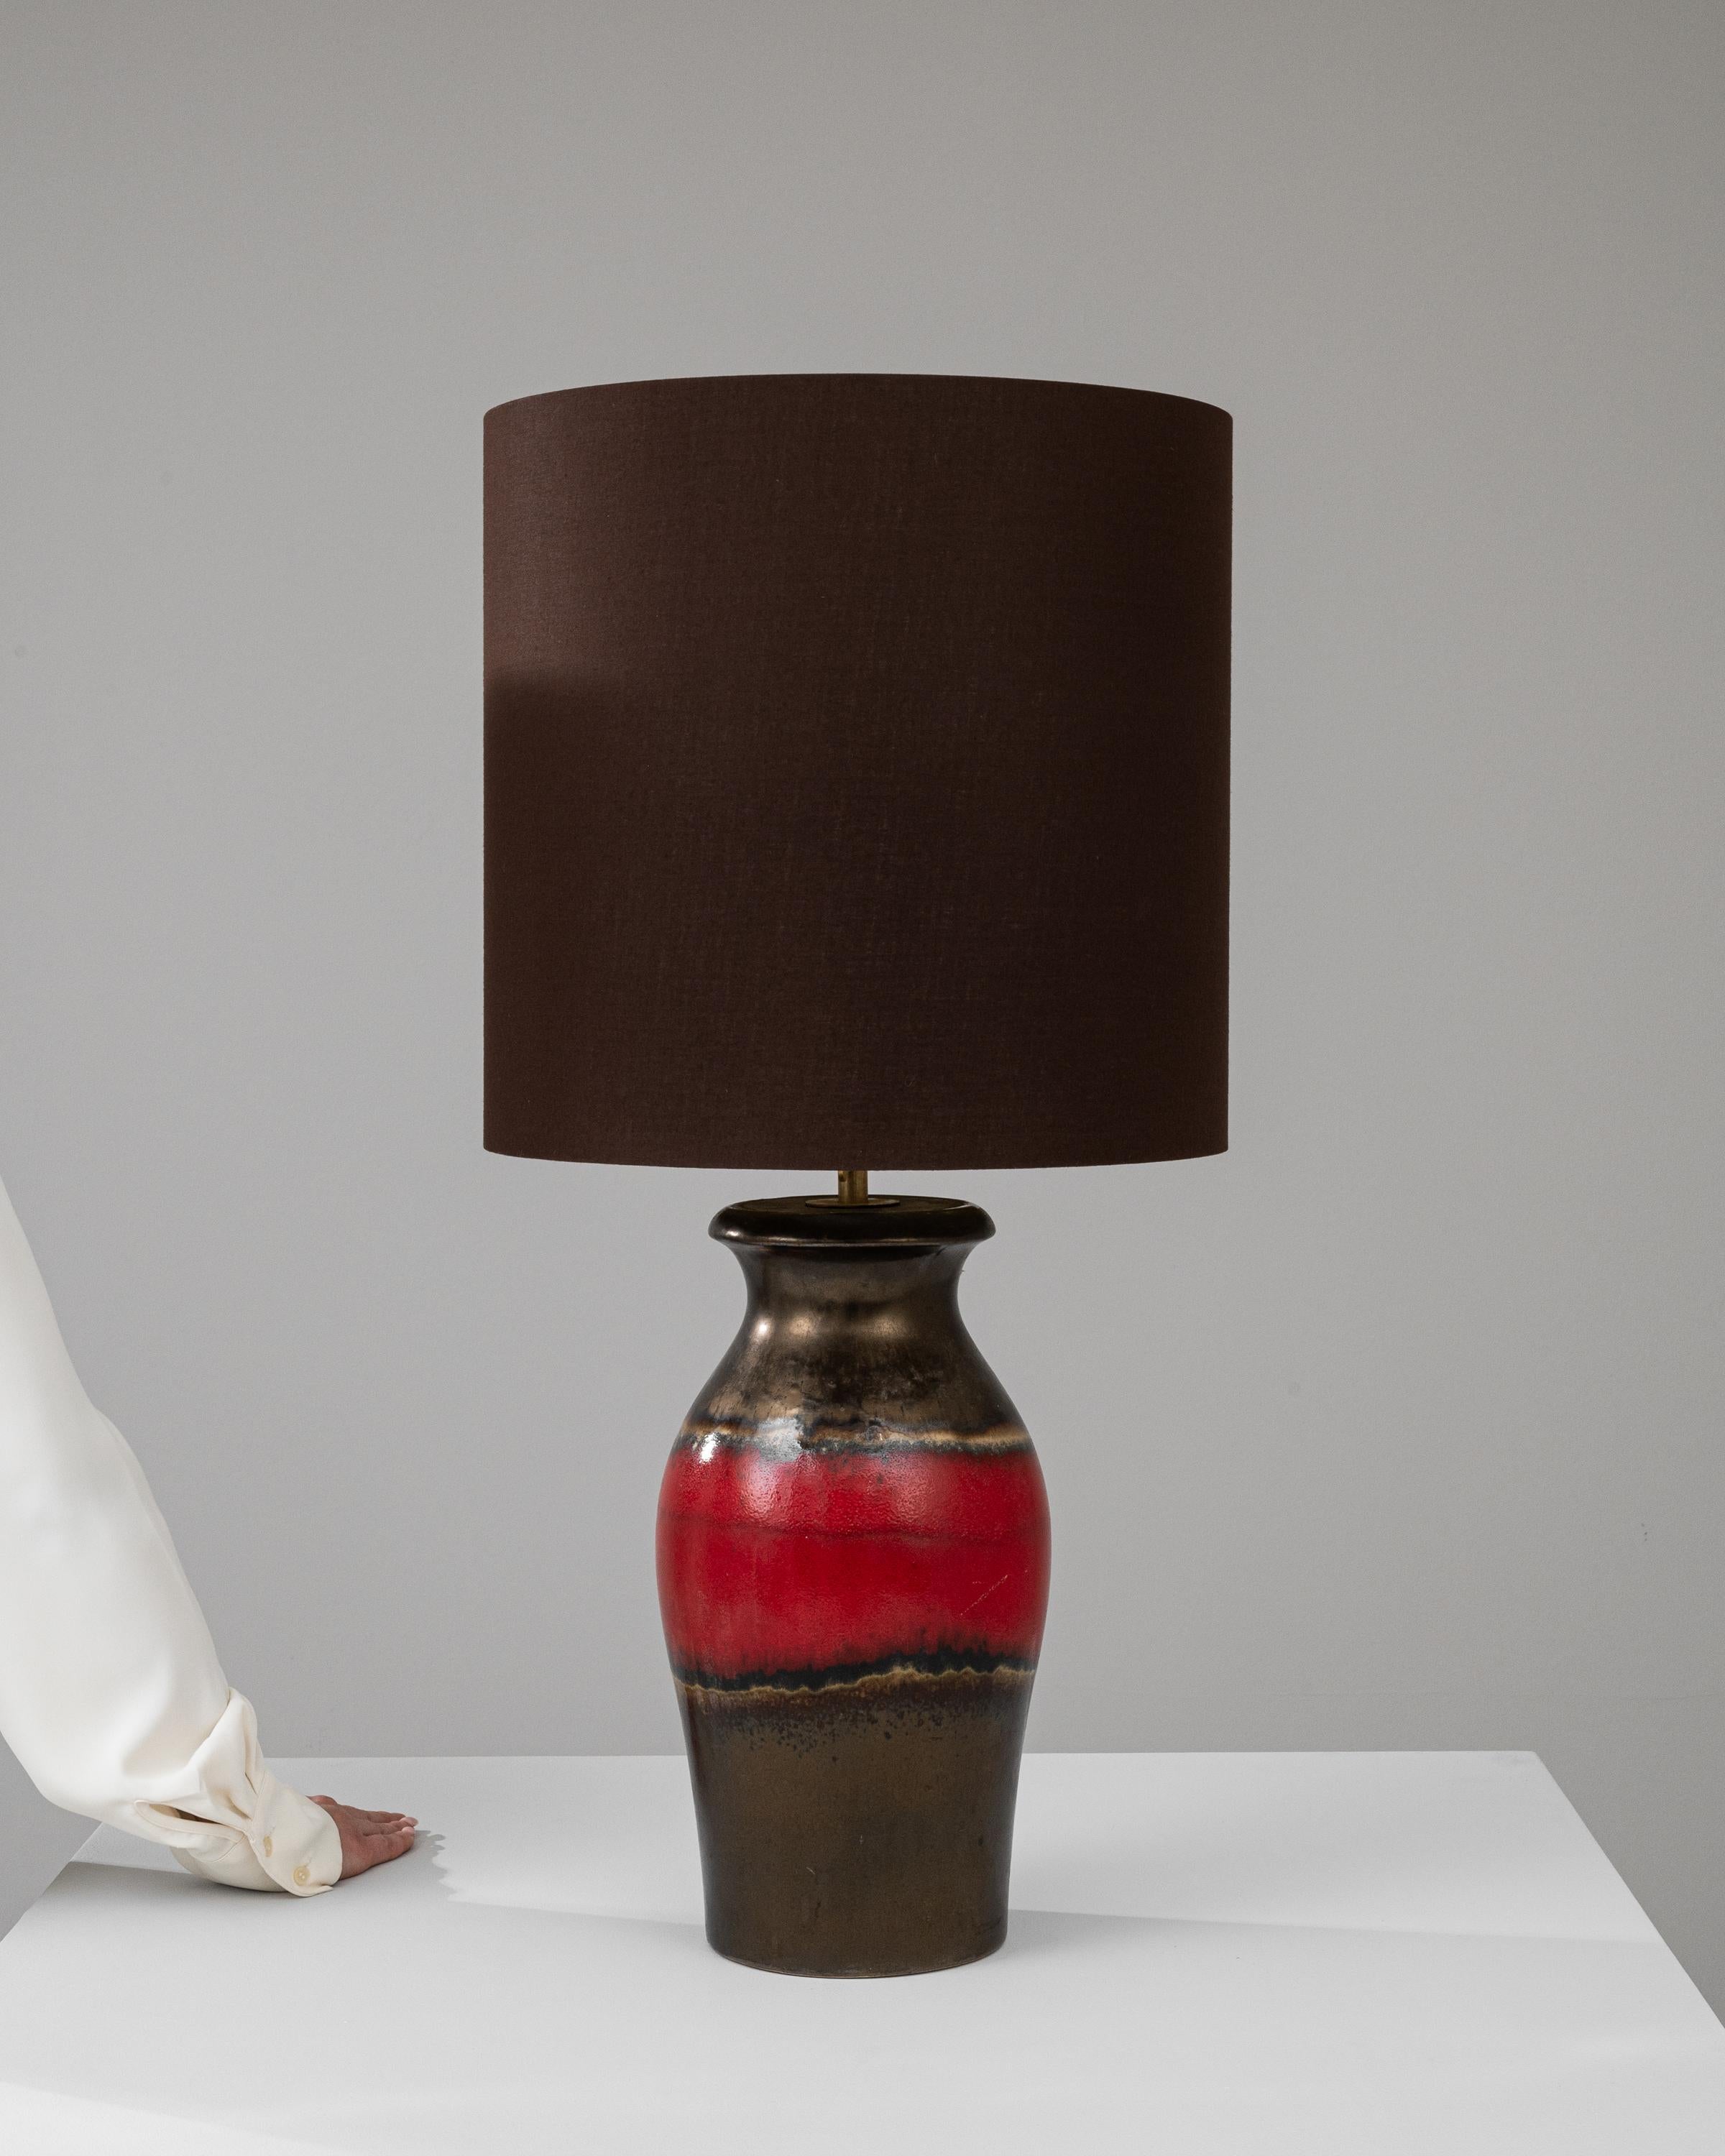 Discover the understated elegance of this 20th Century German Ceramic Table Lamp, a piece where minimalist design meets a touch of drama. The sleek, richly hued lampshade sets a sophisticated tone, perfect for both contemporary and traditional